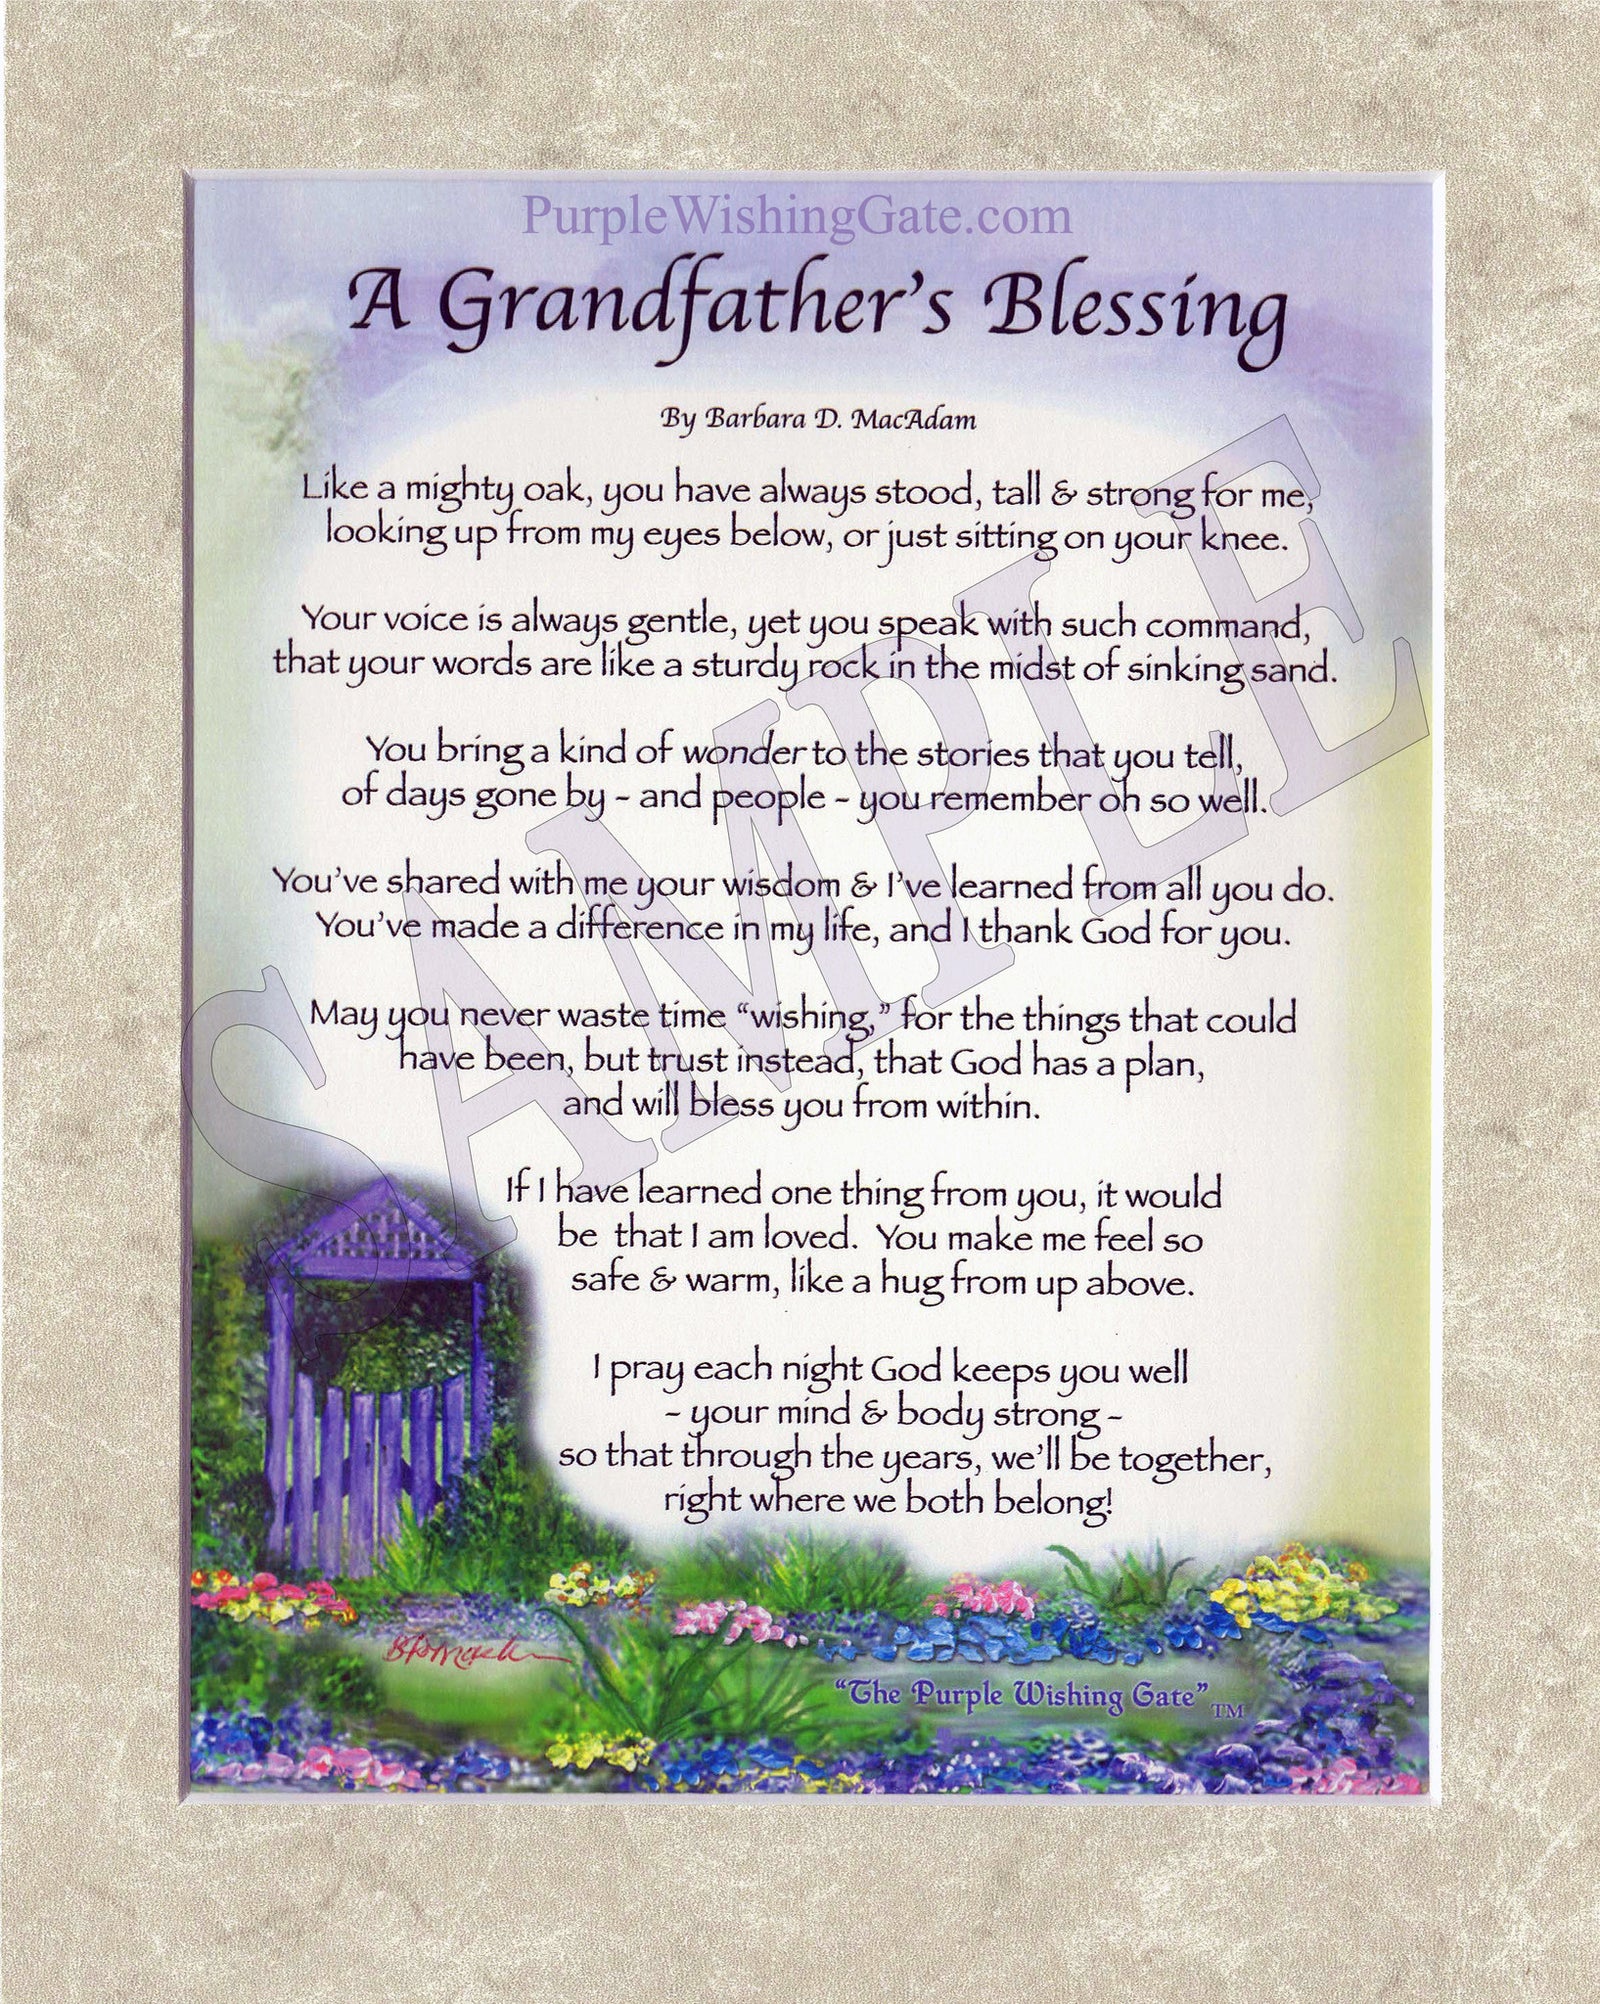 A Grandfather's Blessing (8x10) - 8x10 Custom Matted Clearance - PurpleWishingGate.com